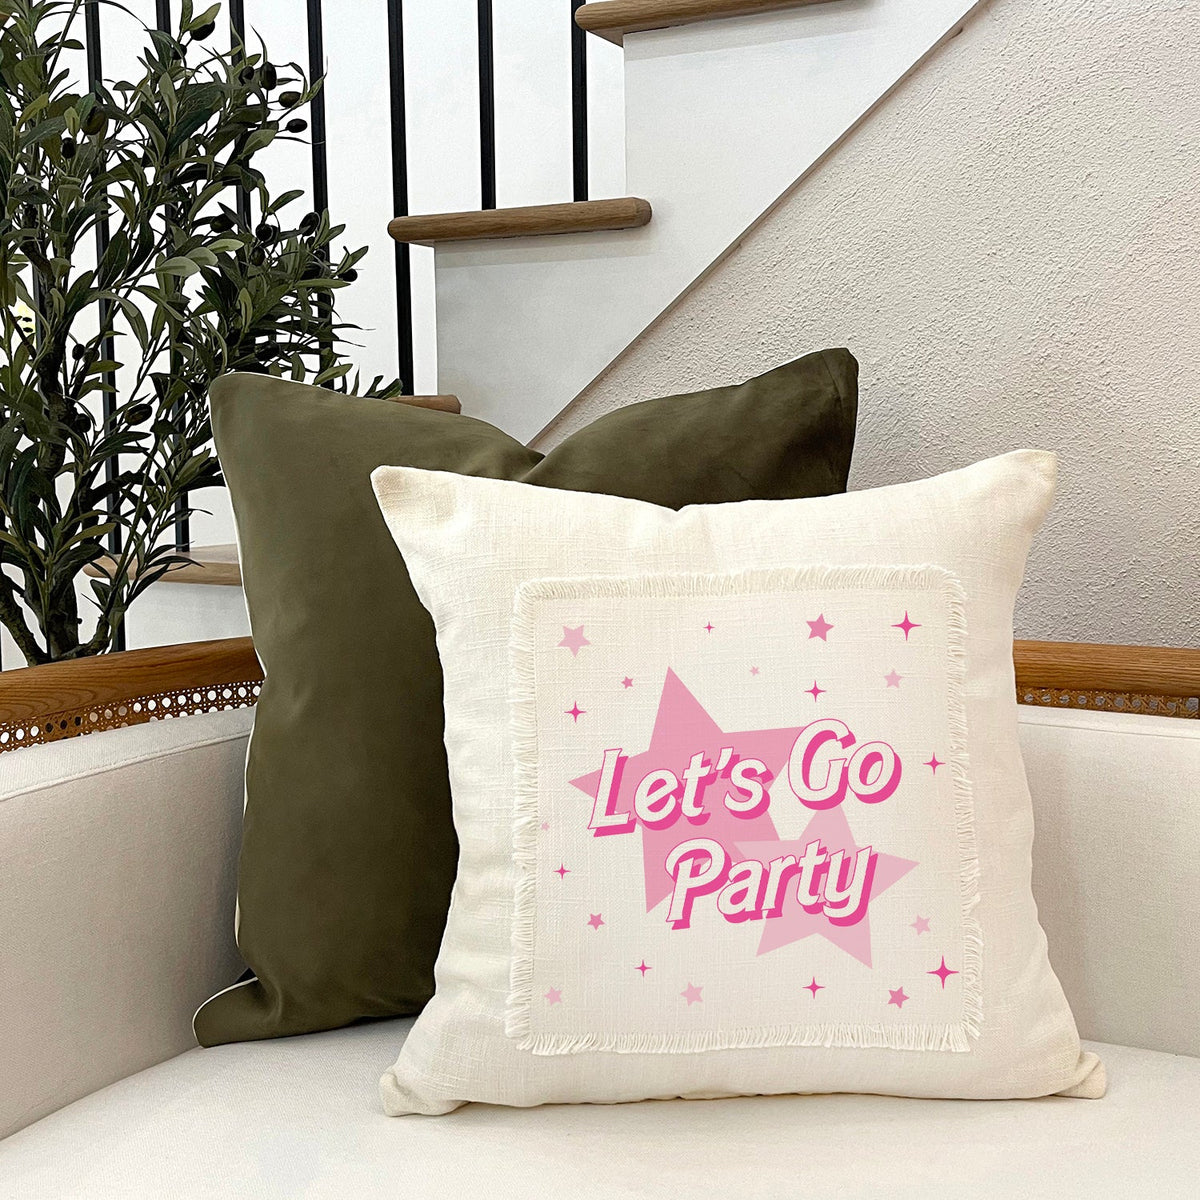 Lets Go Party / Trend MS Natural Pillow Cover